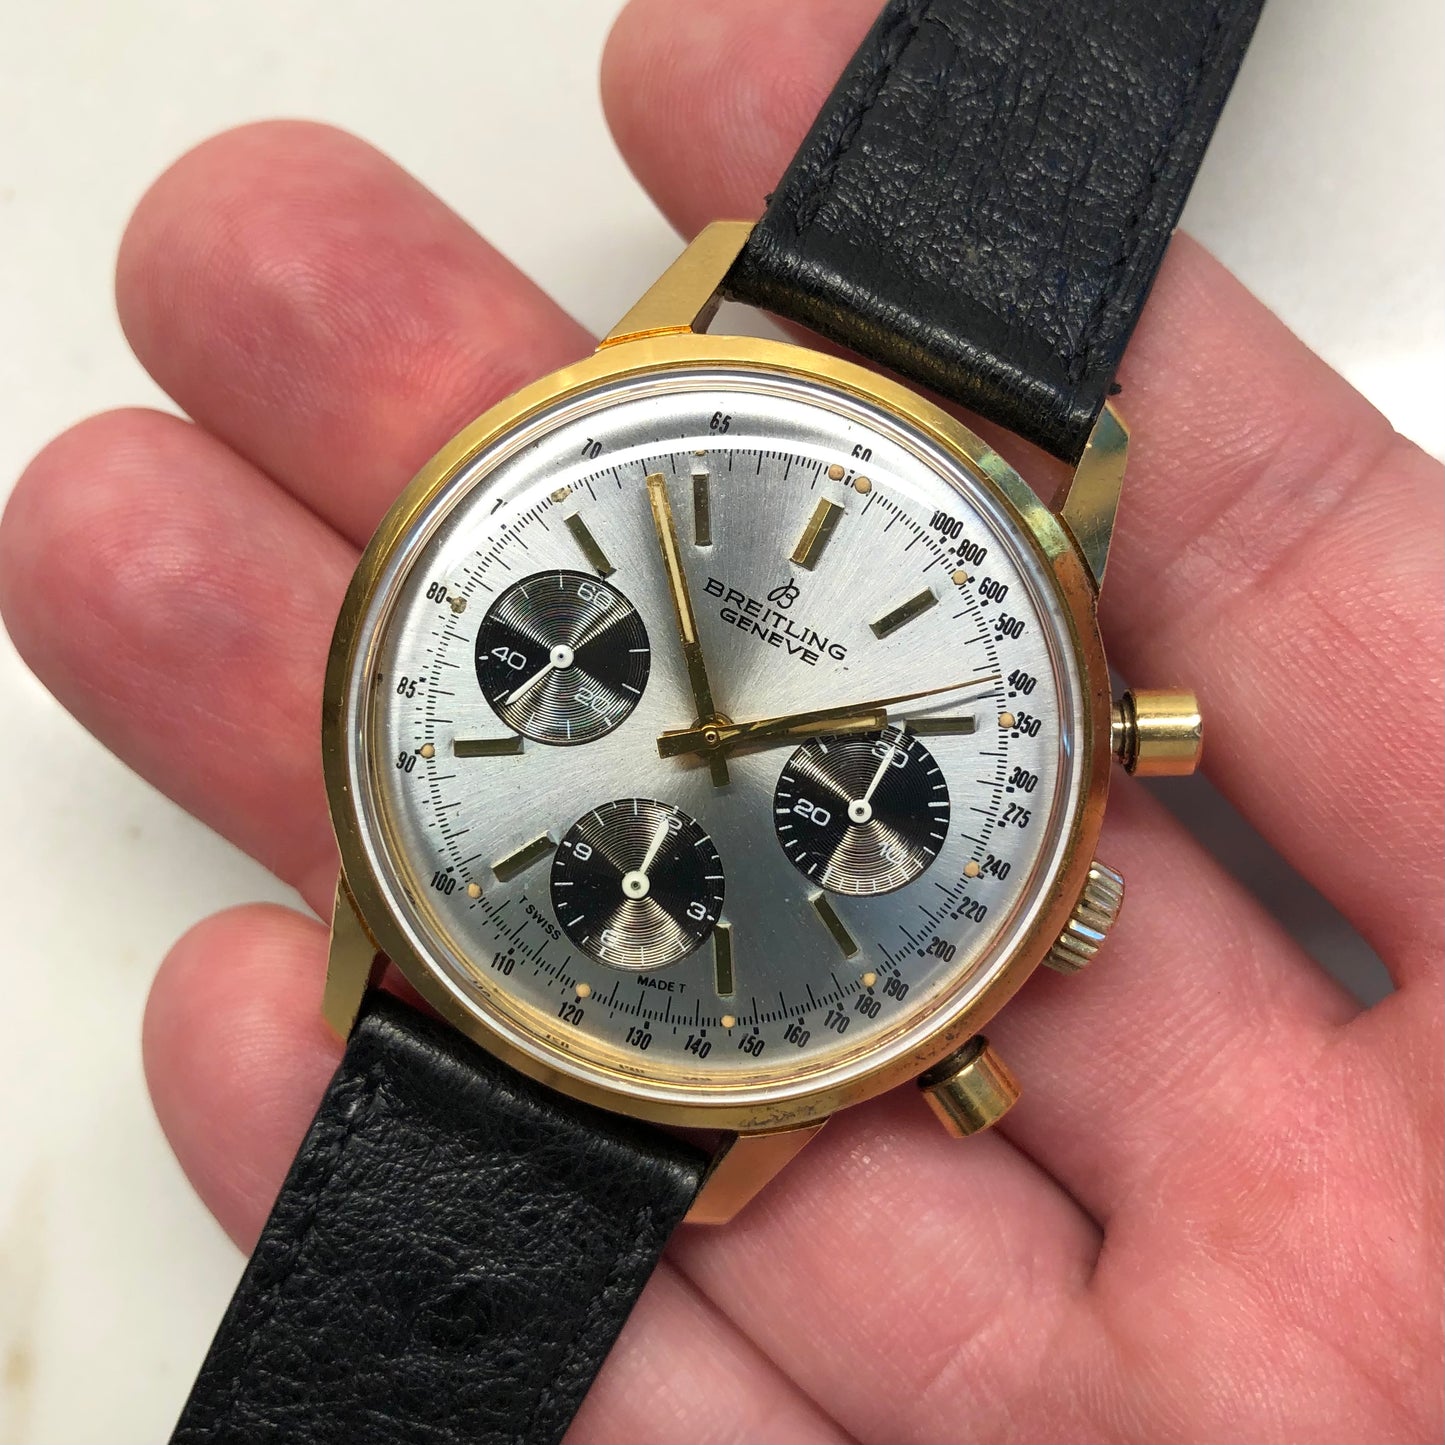 1974 Vintage Breitling Top Time 815 Gold Top Steel Chronograph Silver Dial Wristwatch - Hashtag Watch Company